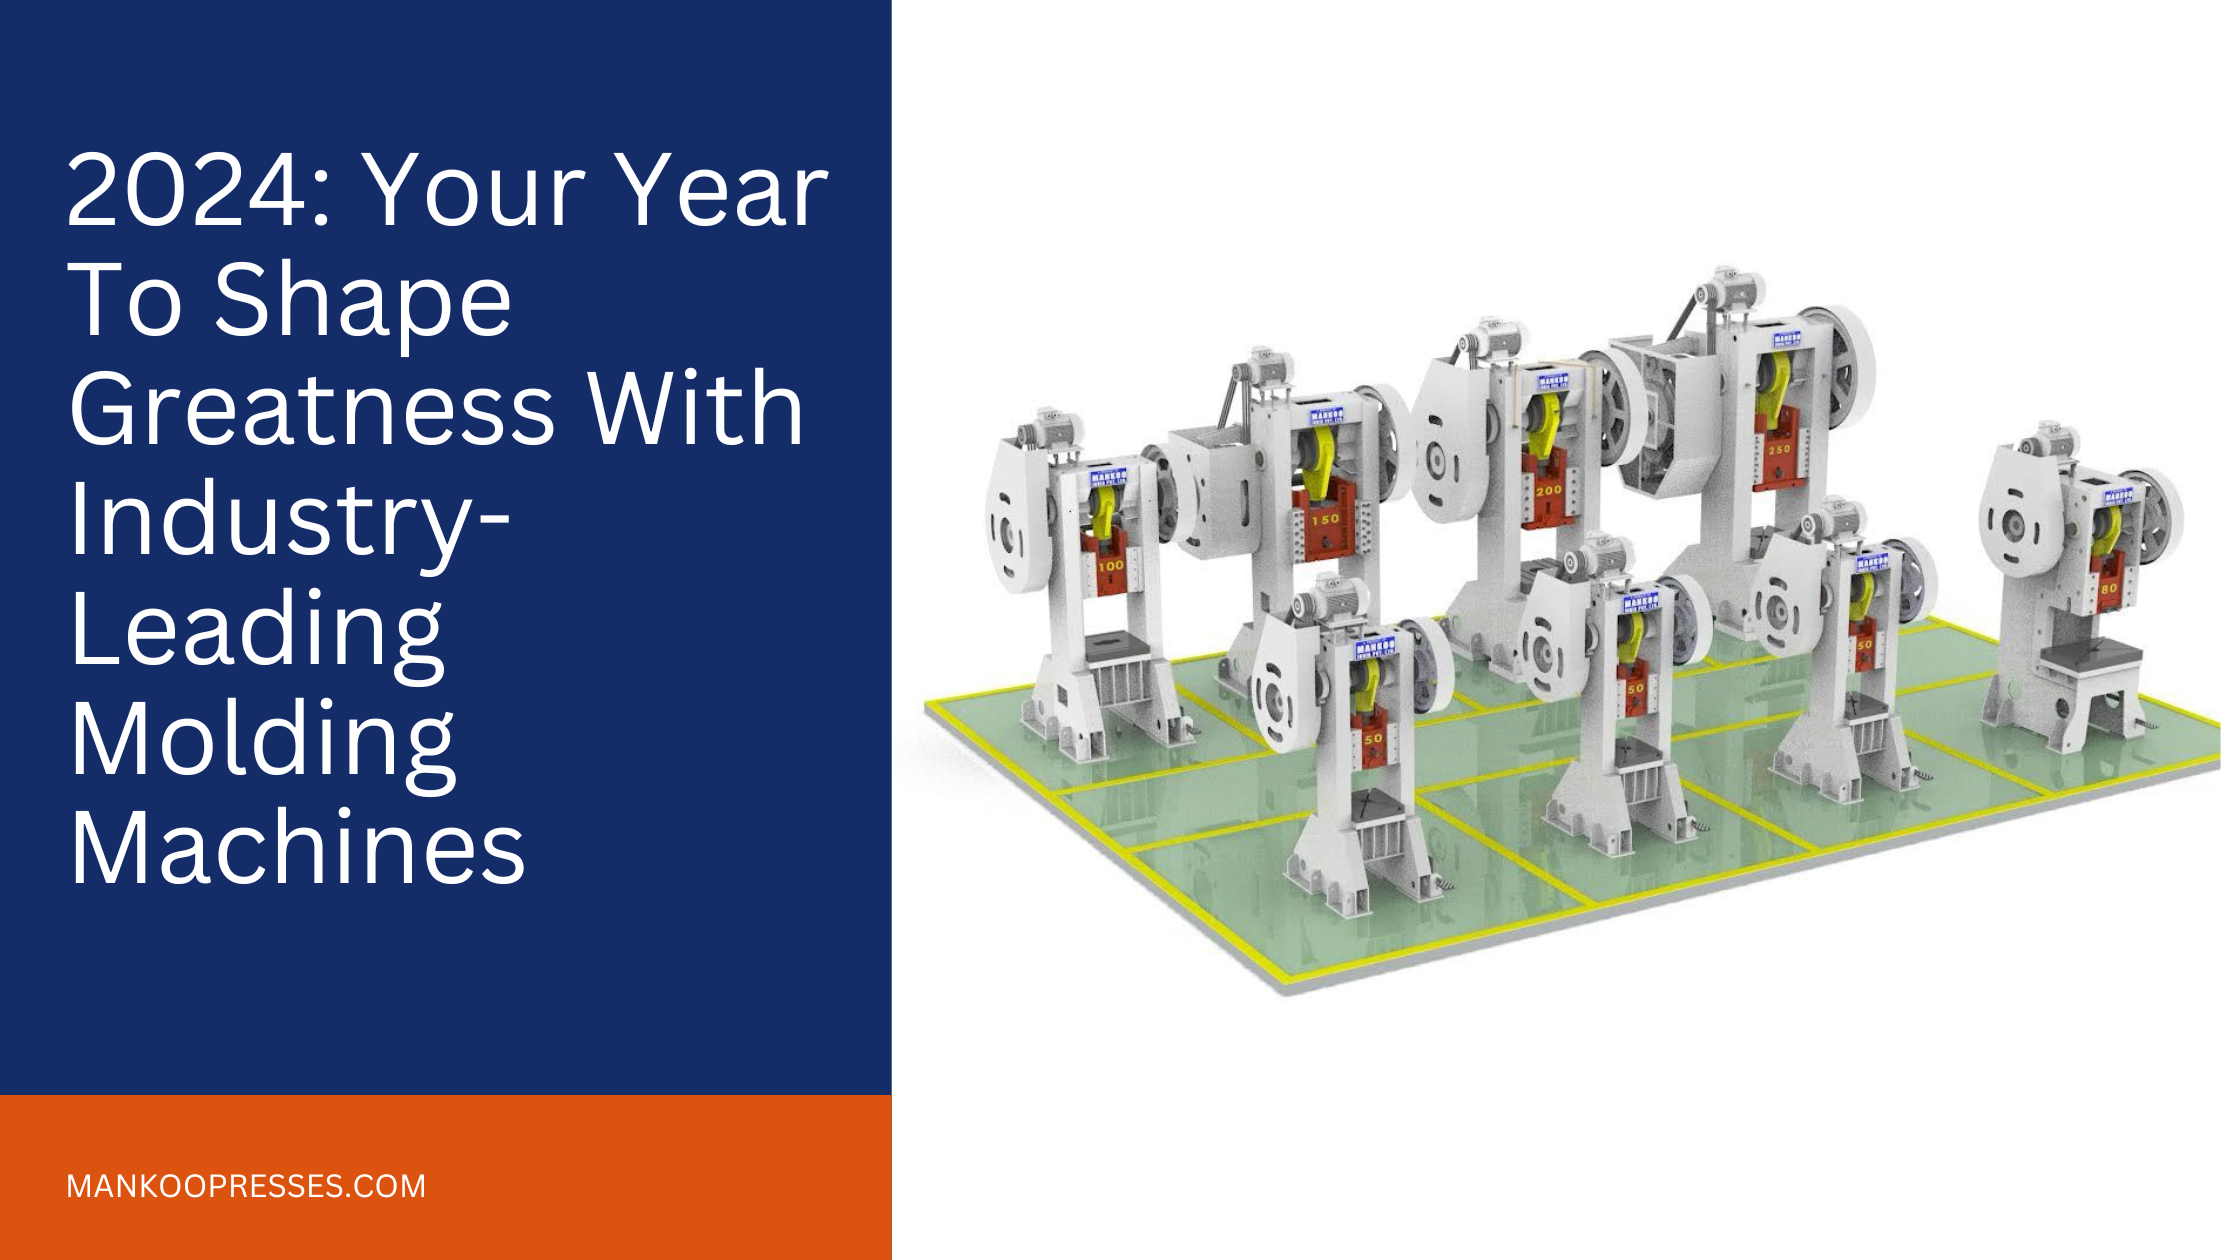 2024: Your Year To Shape Greatness With Industry-Leading Molding Machines